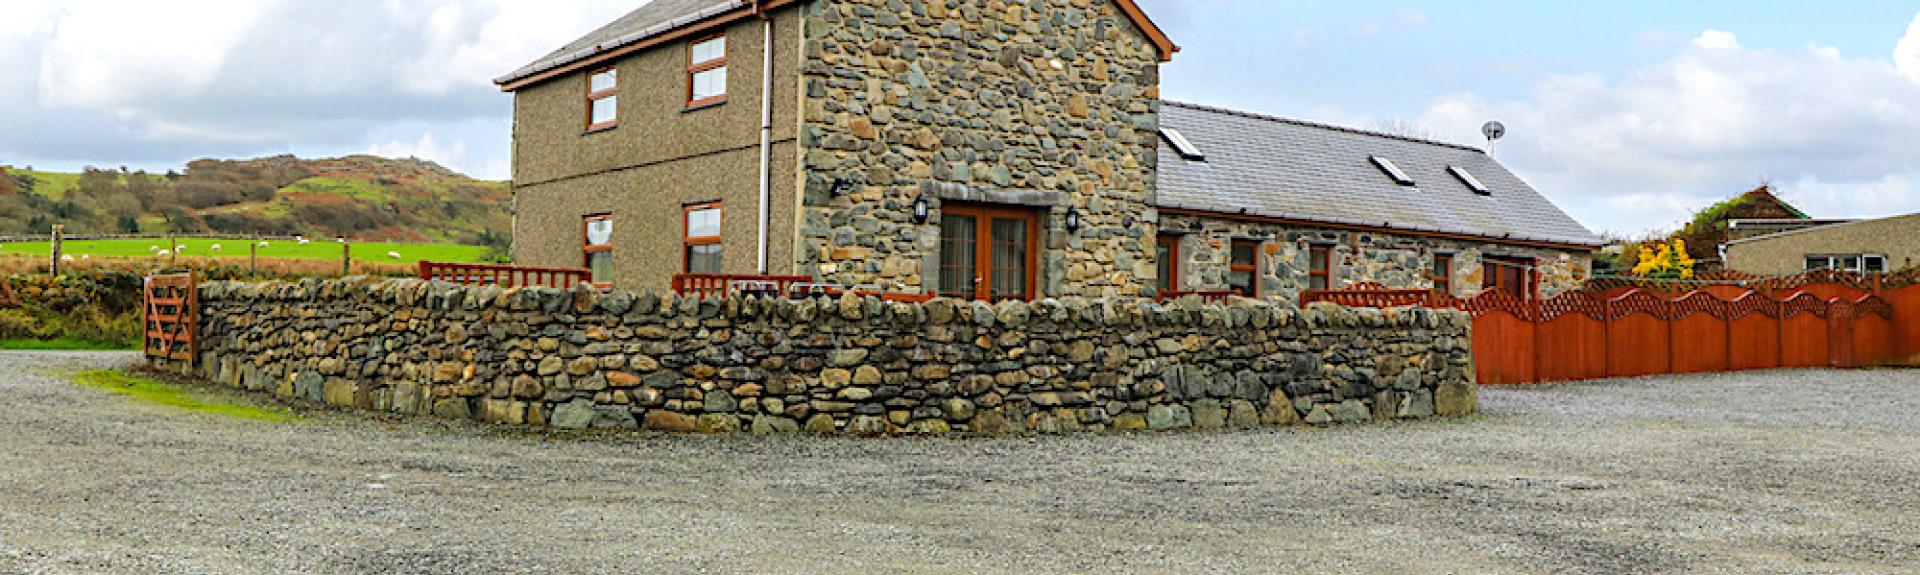 A Welsh stone-built barn conversion surrounded by a low stone wall in a large courtyard.